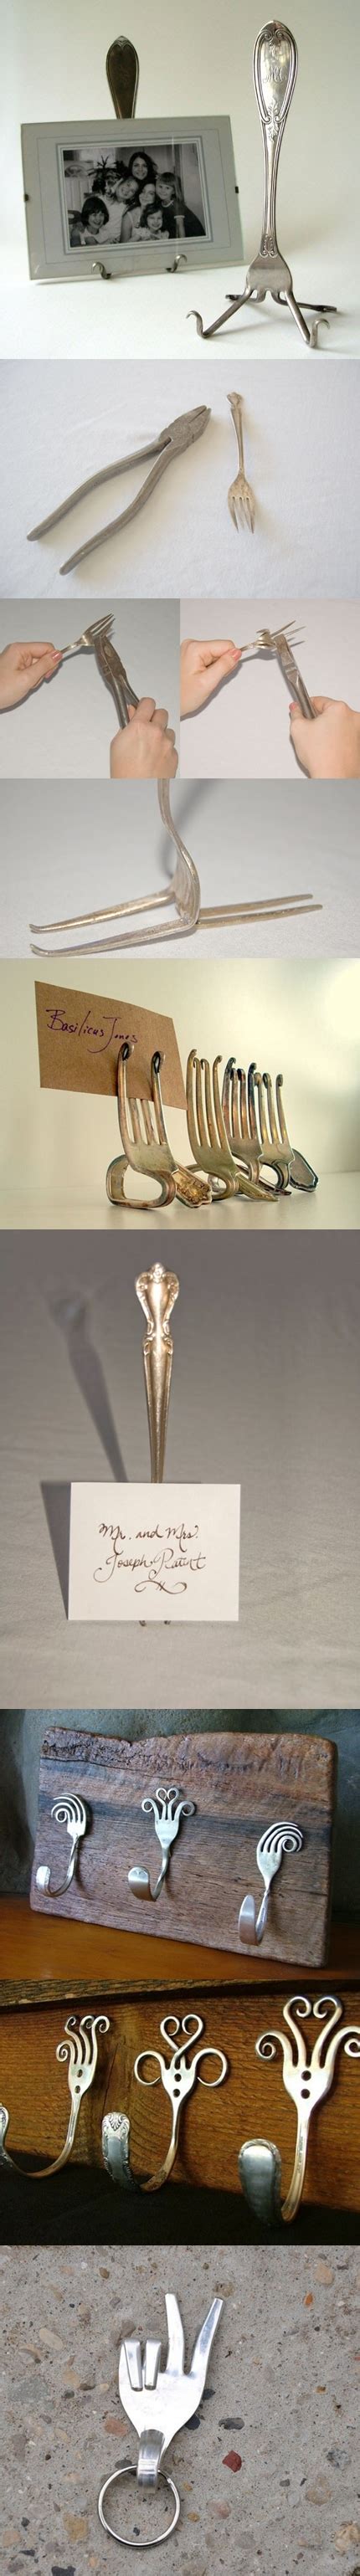 You Could Do So Much With Forks Diy And Crafts Tutorials